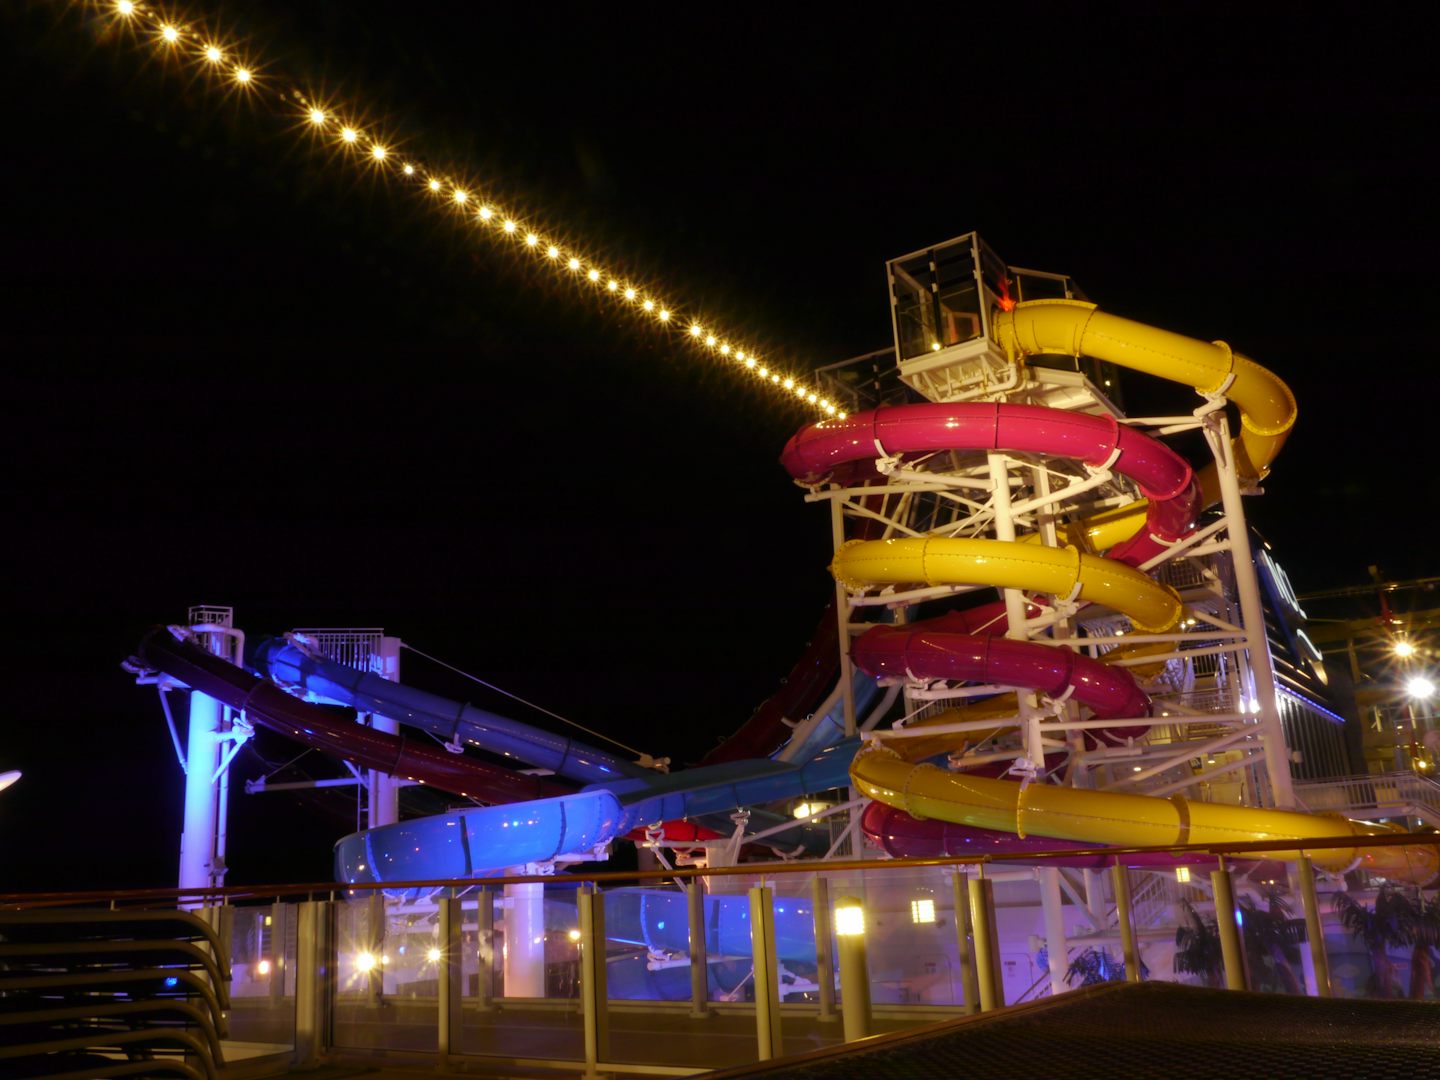 The water slides at night